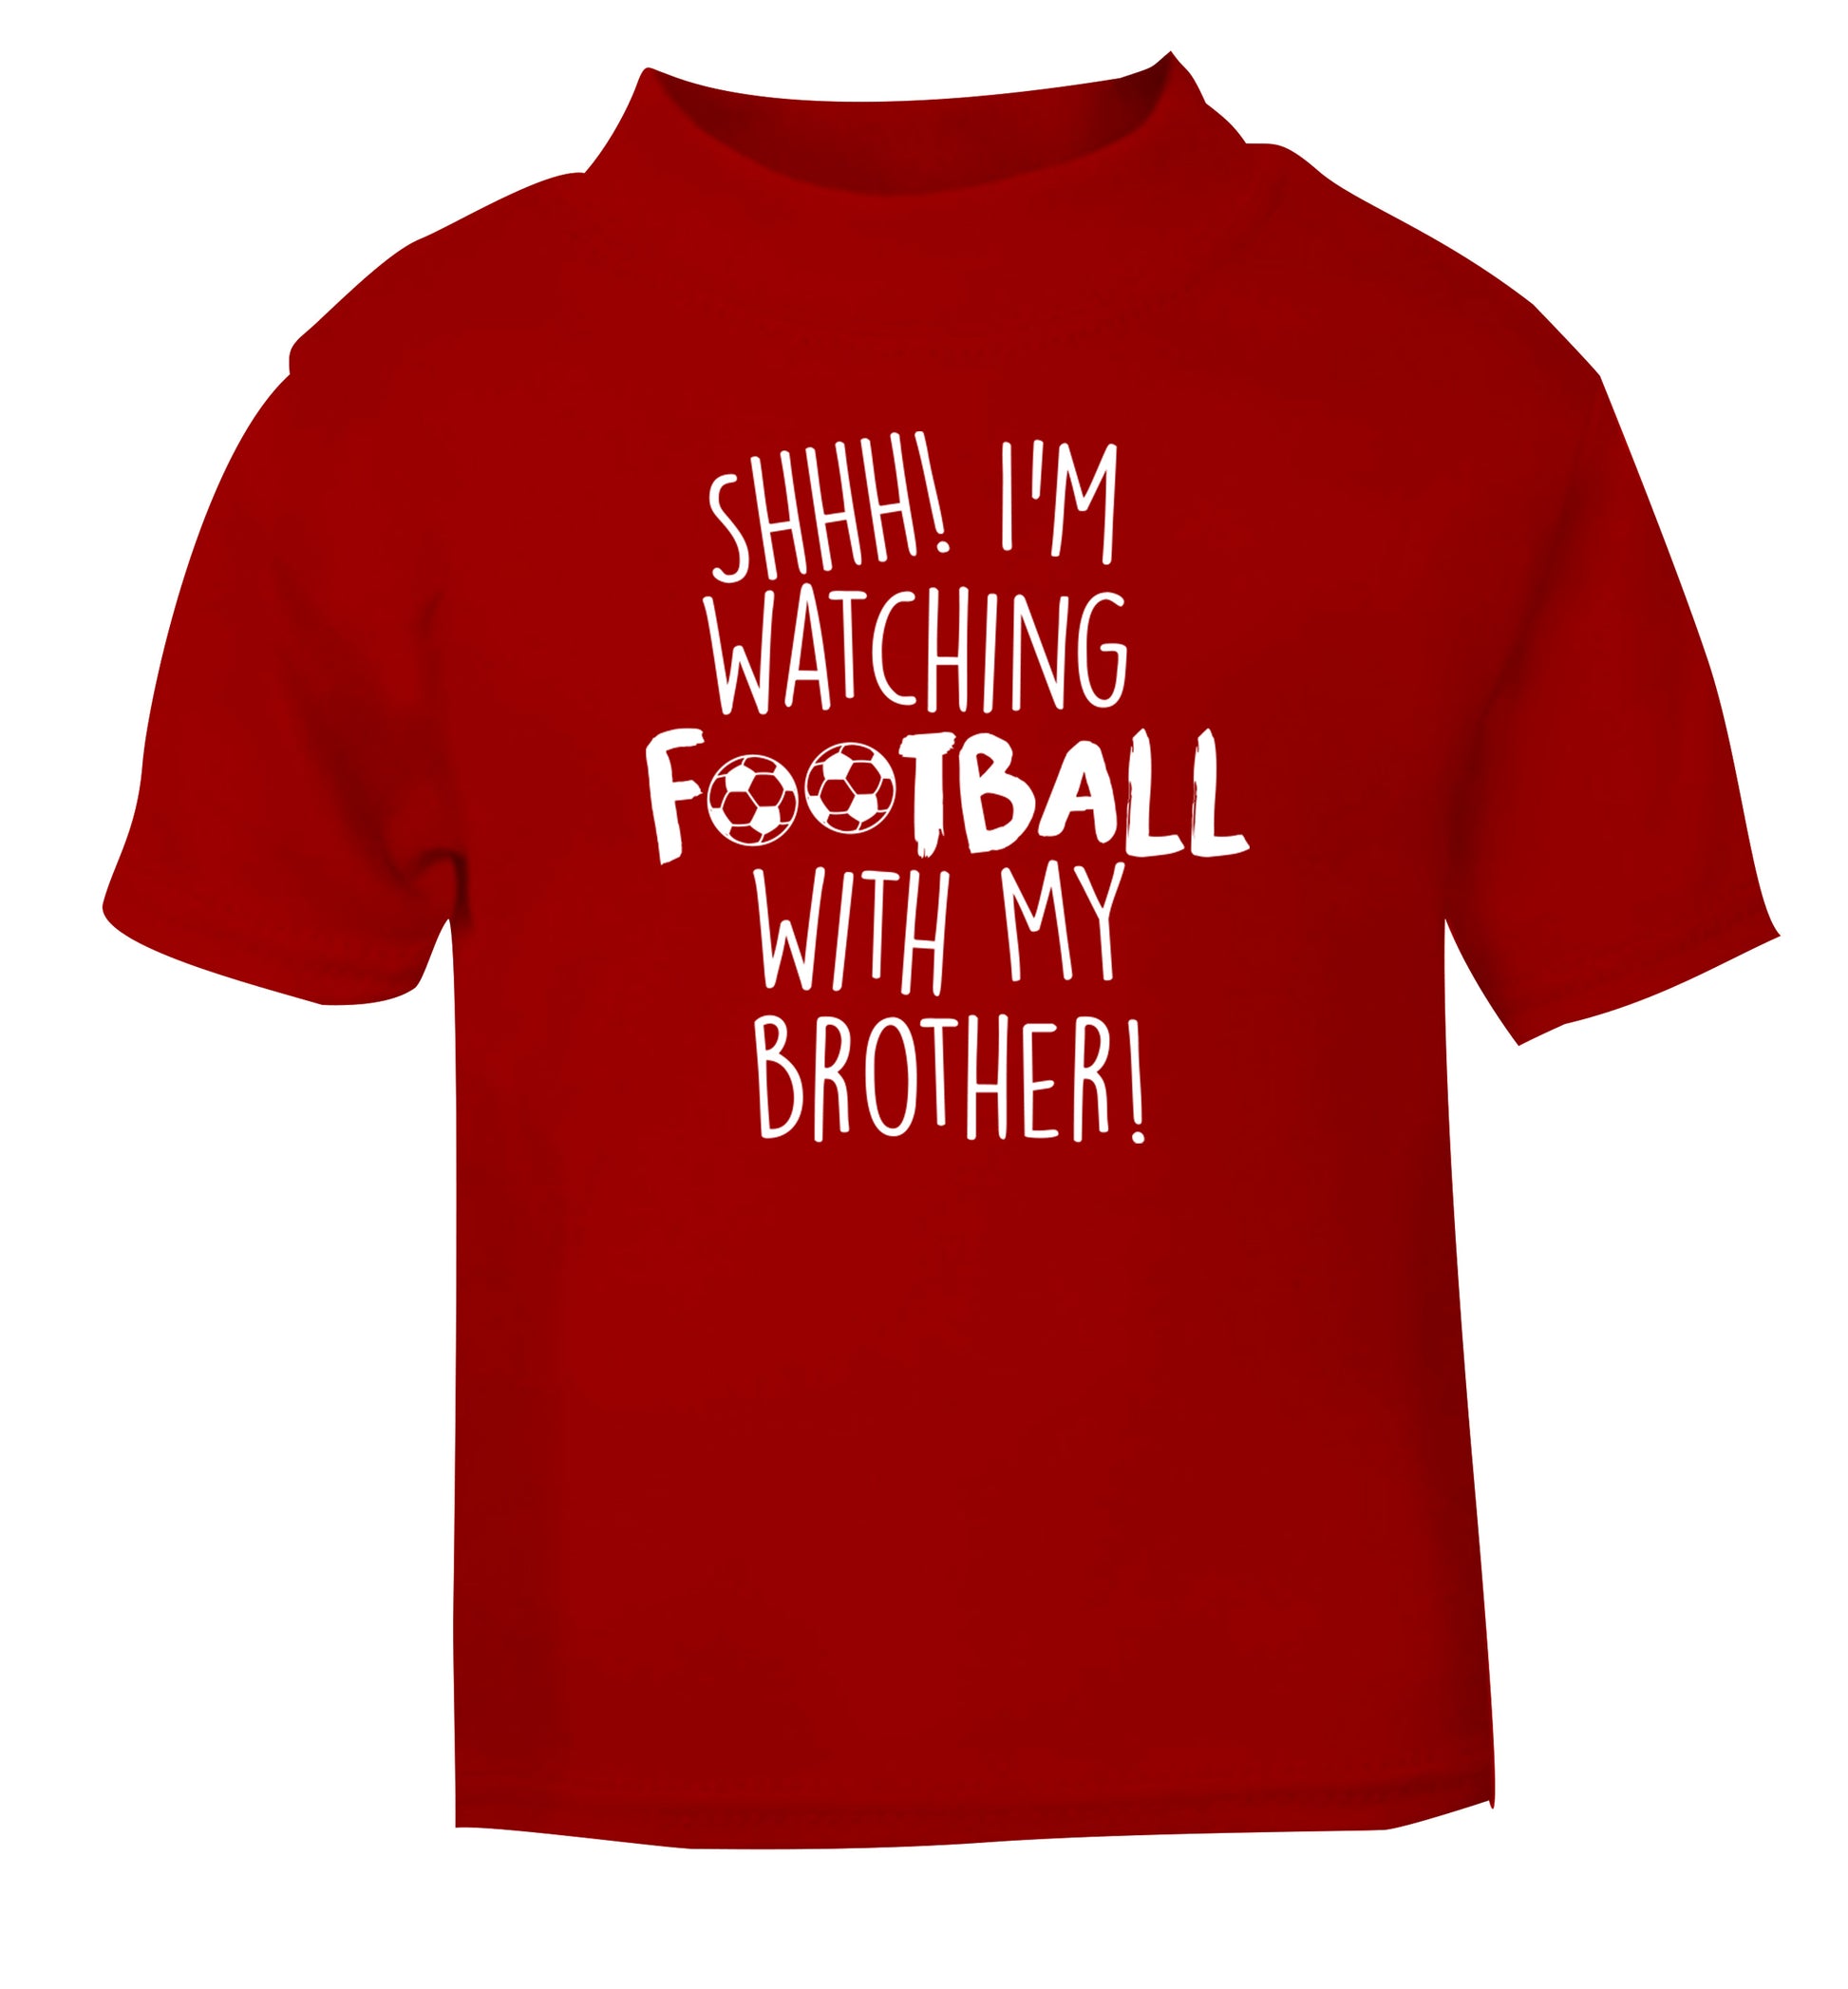 Shhh I'm watching football with my brother red Baby Toddler Tshirt 2 Years